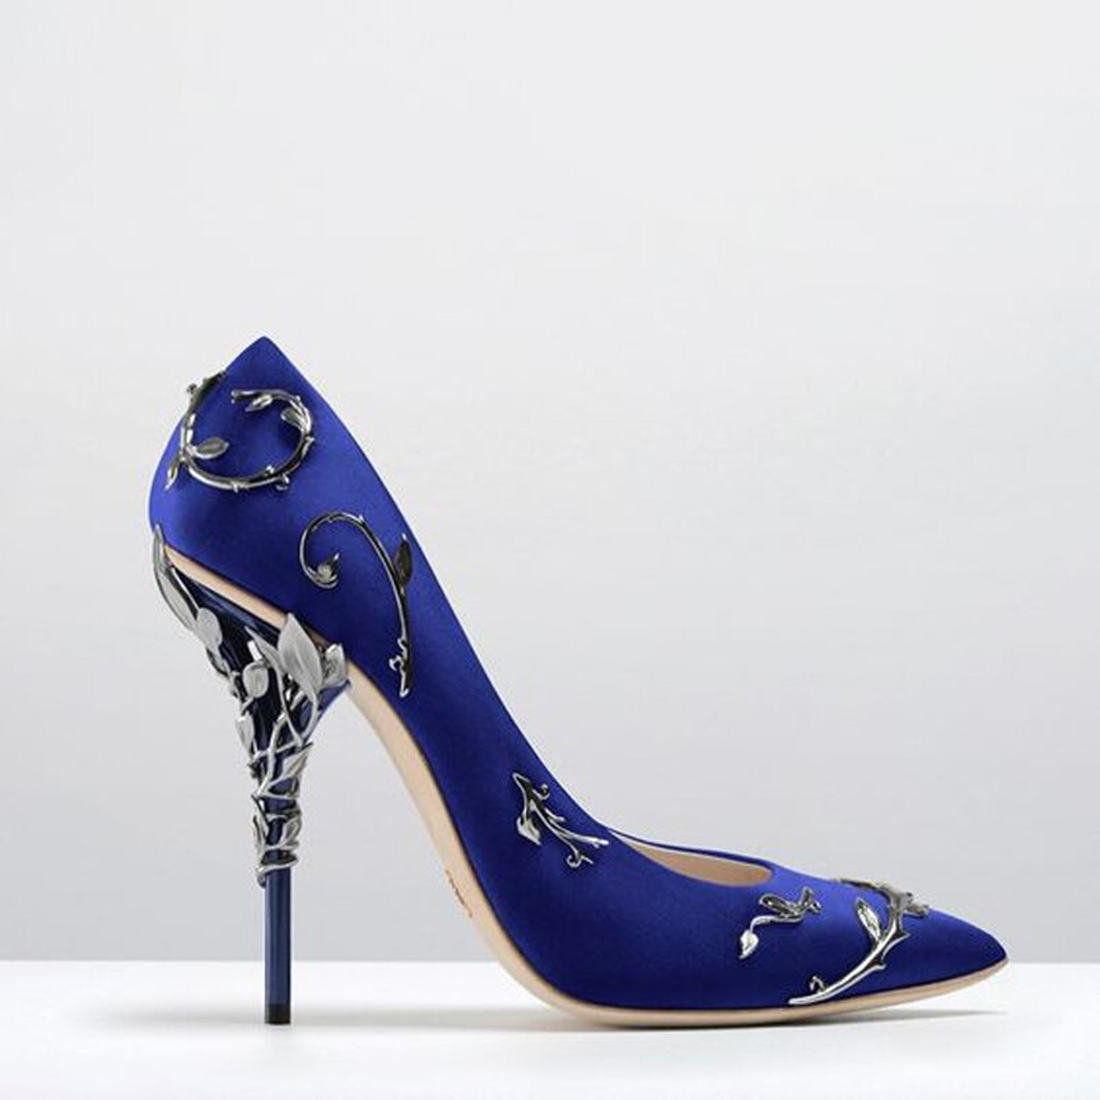 Women's Silk High Heel Pumps With Pointed Toe